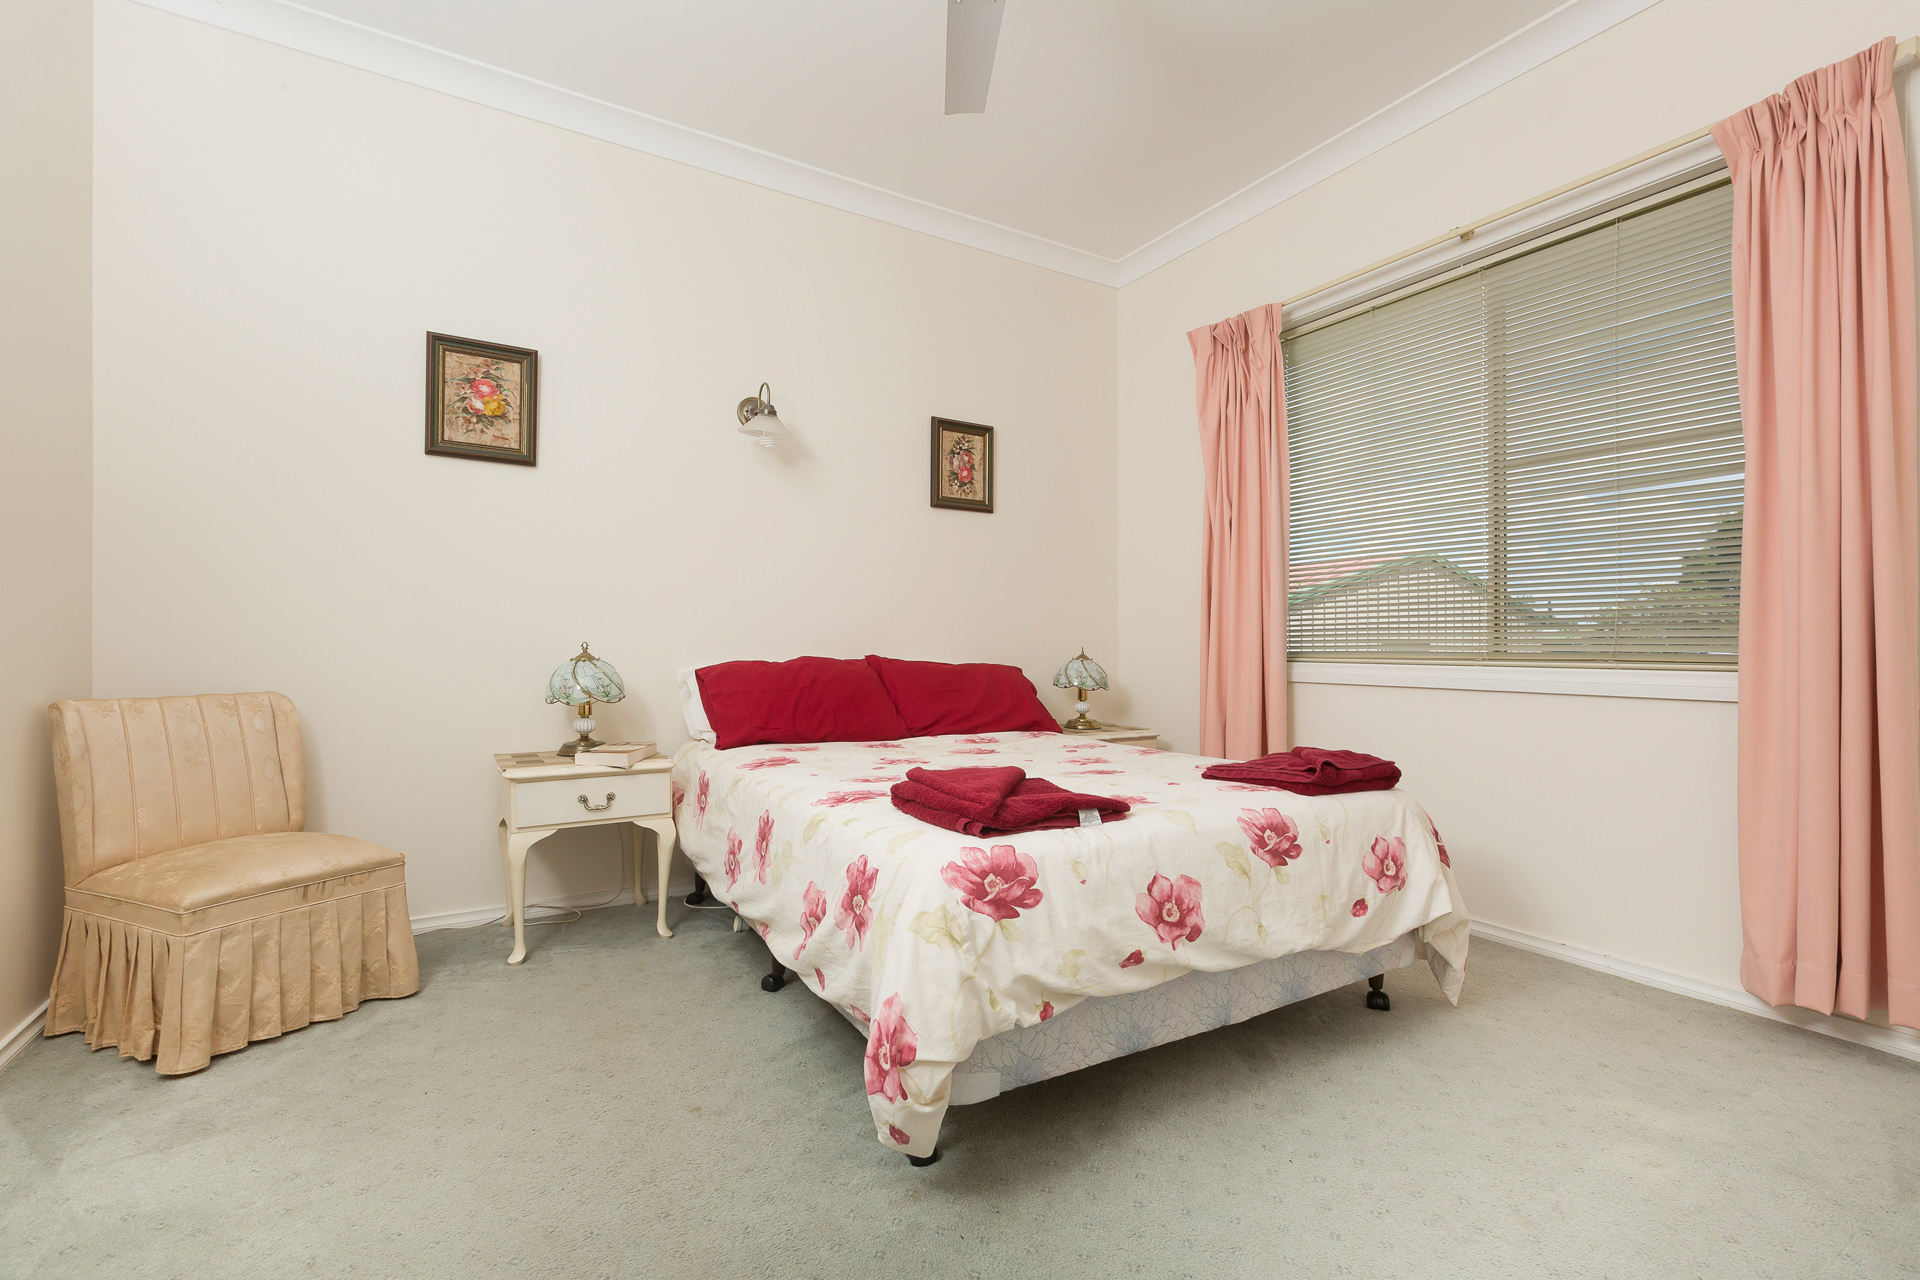 Cranford Waterfront Cottage - Coogee Beach Accommodation 8